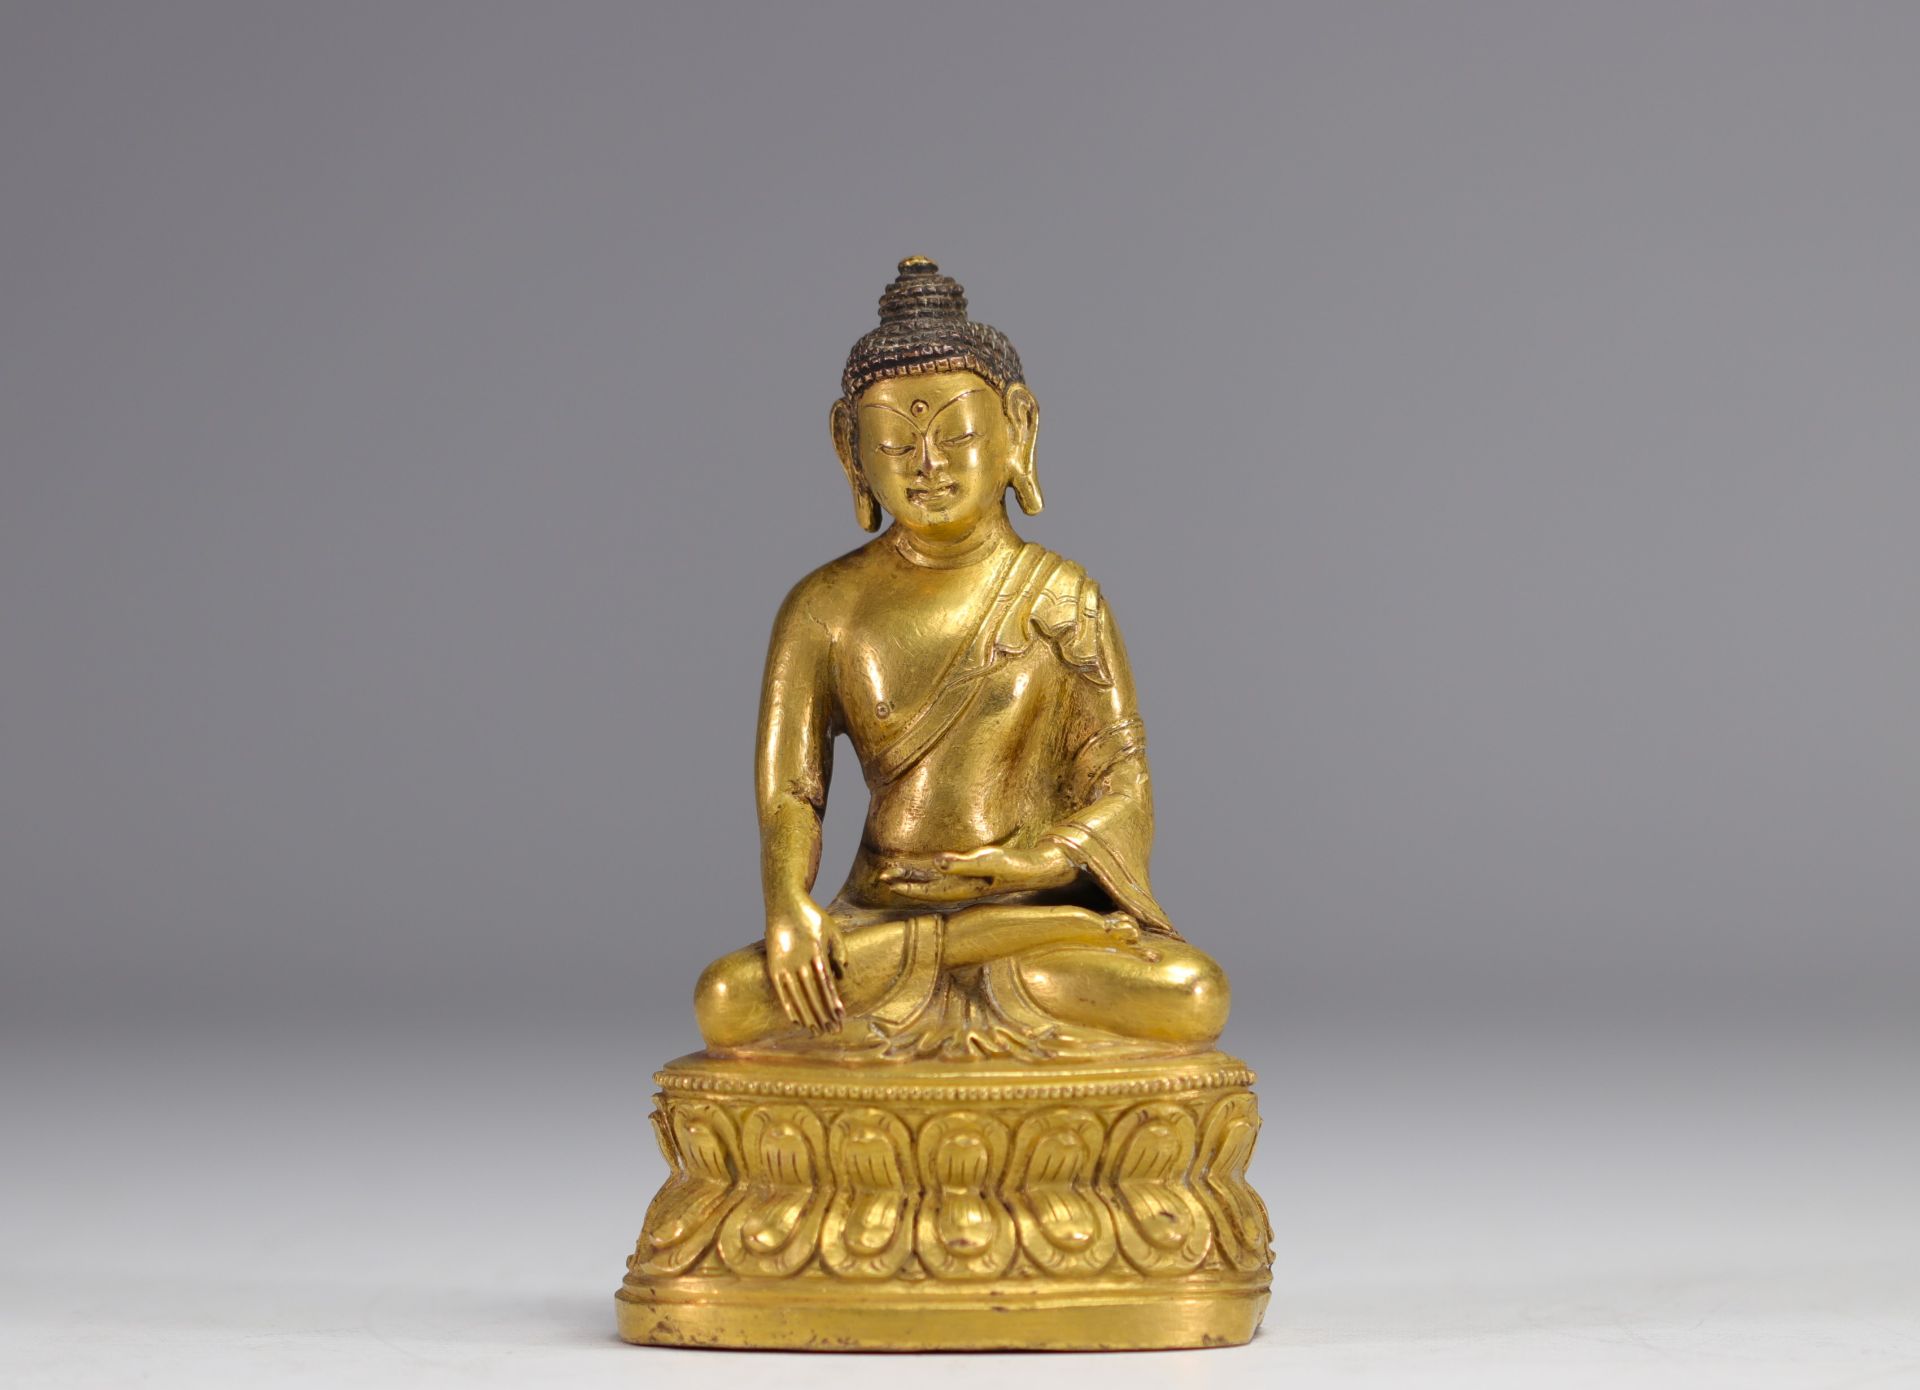 Sculpture of a seated Buddha on a gilded bronze base